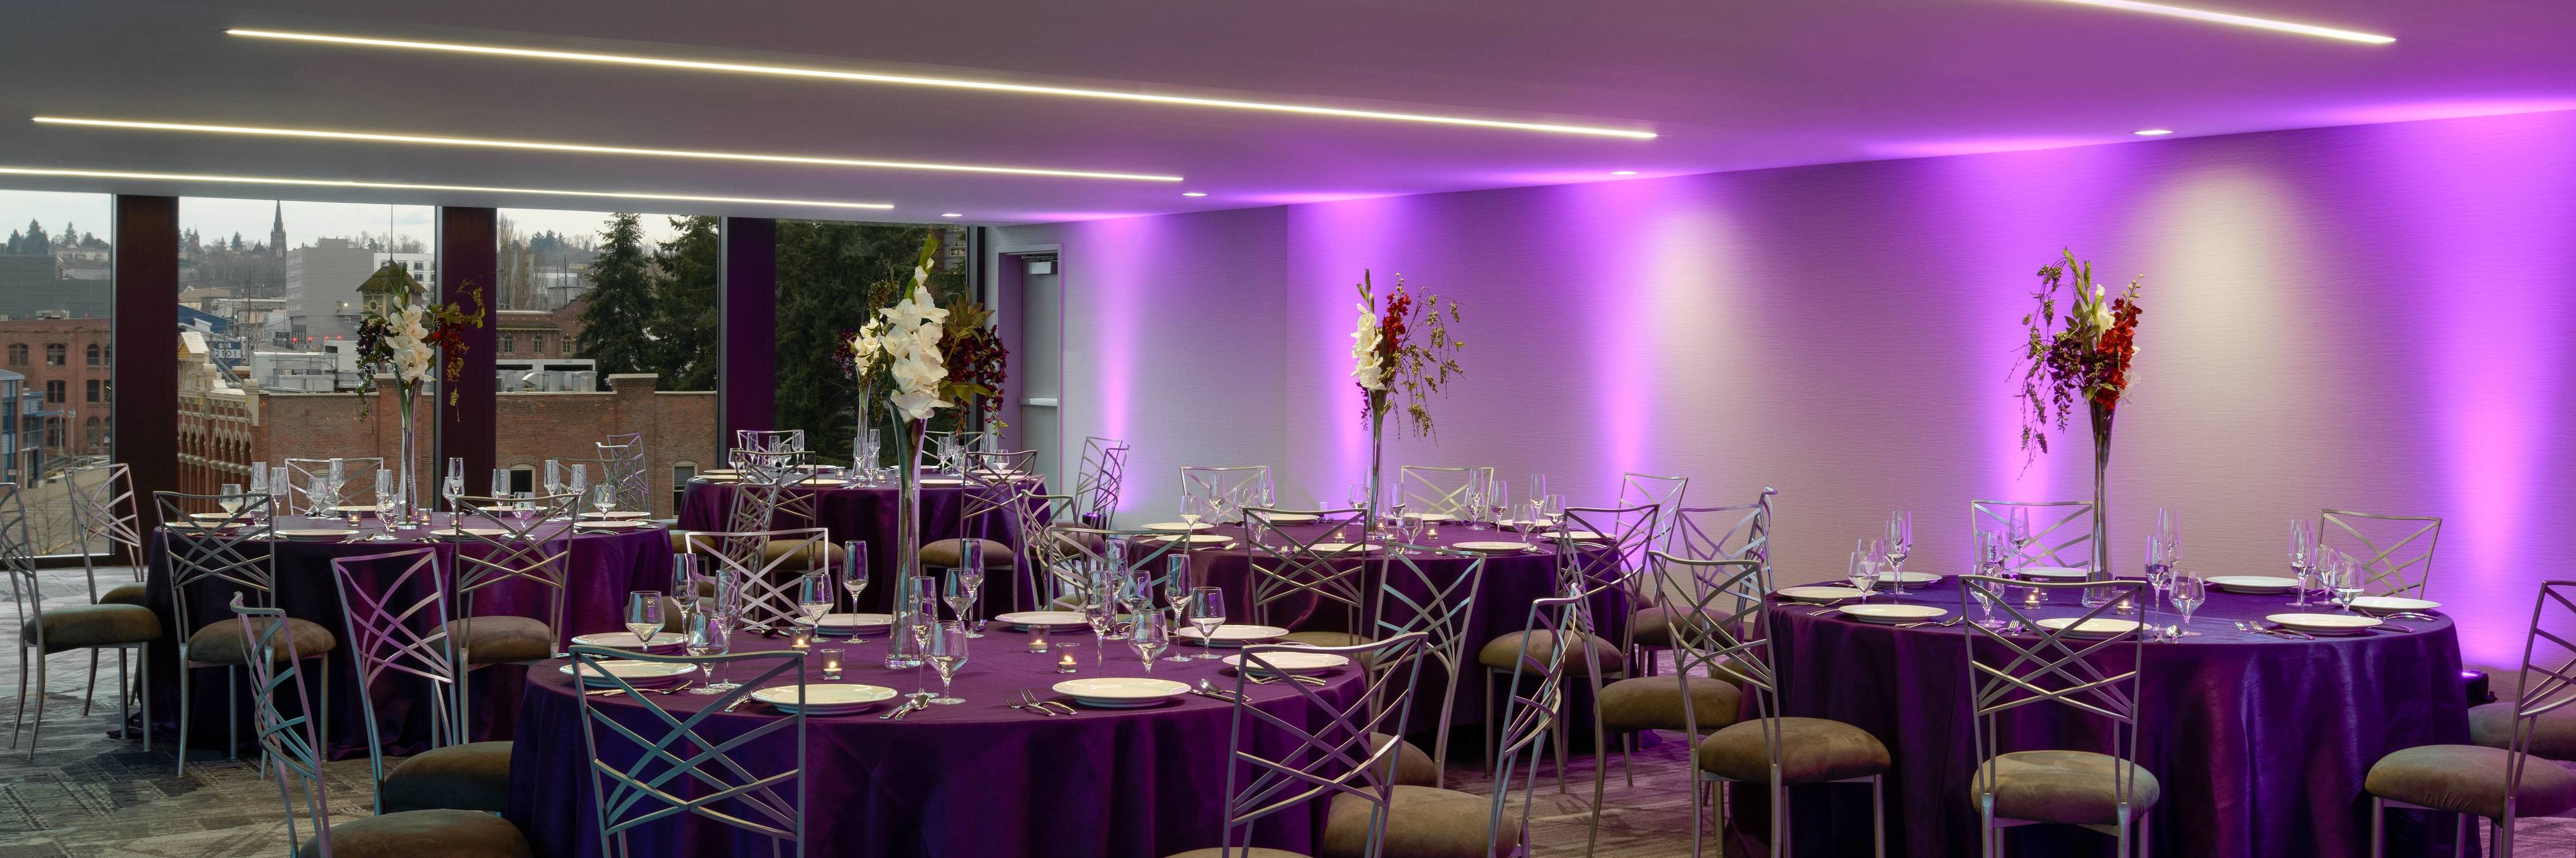 Ballroom with pink accent lighting